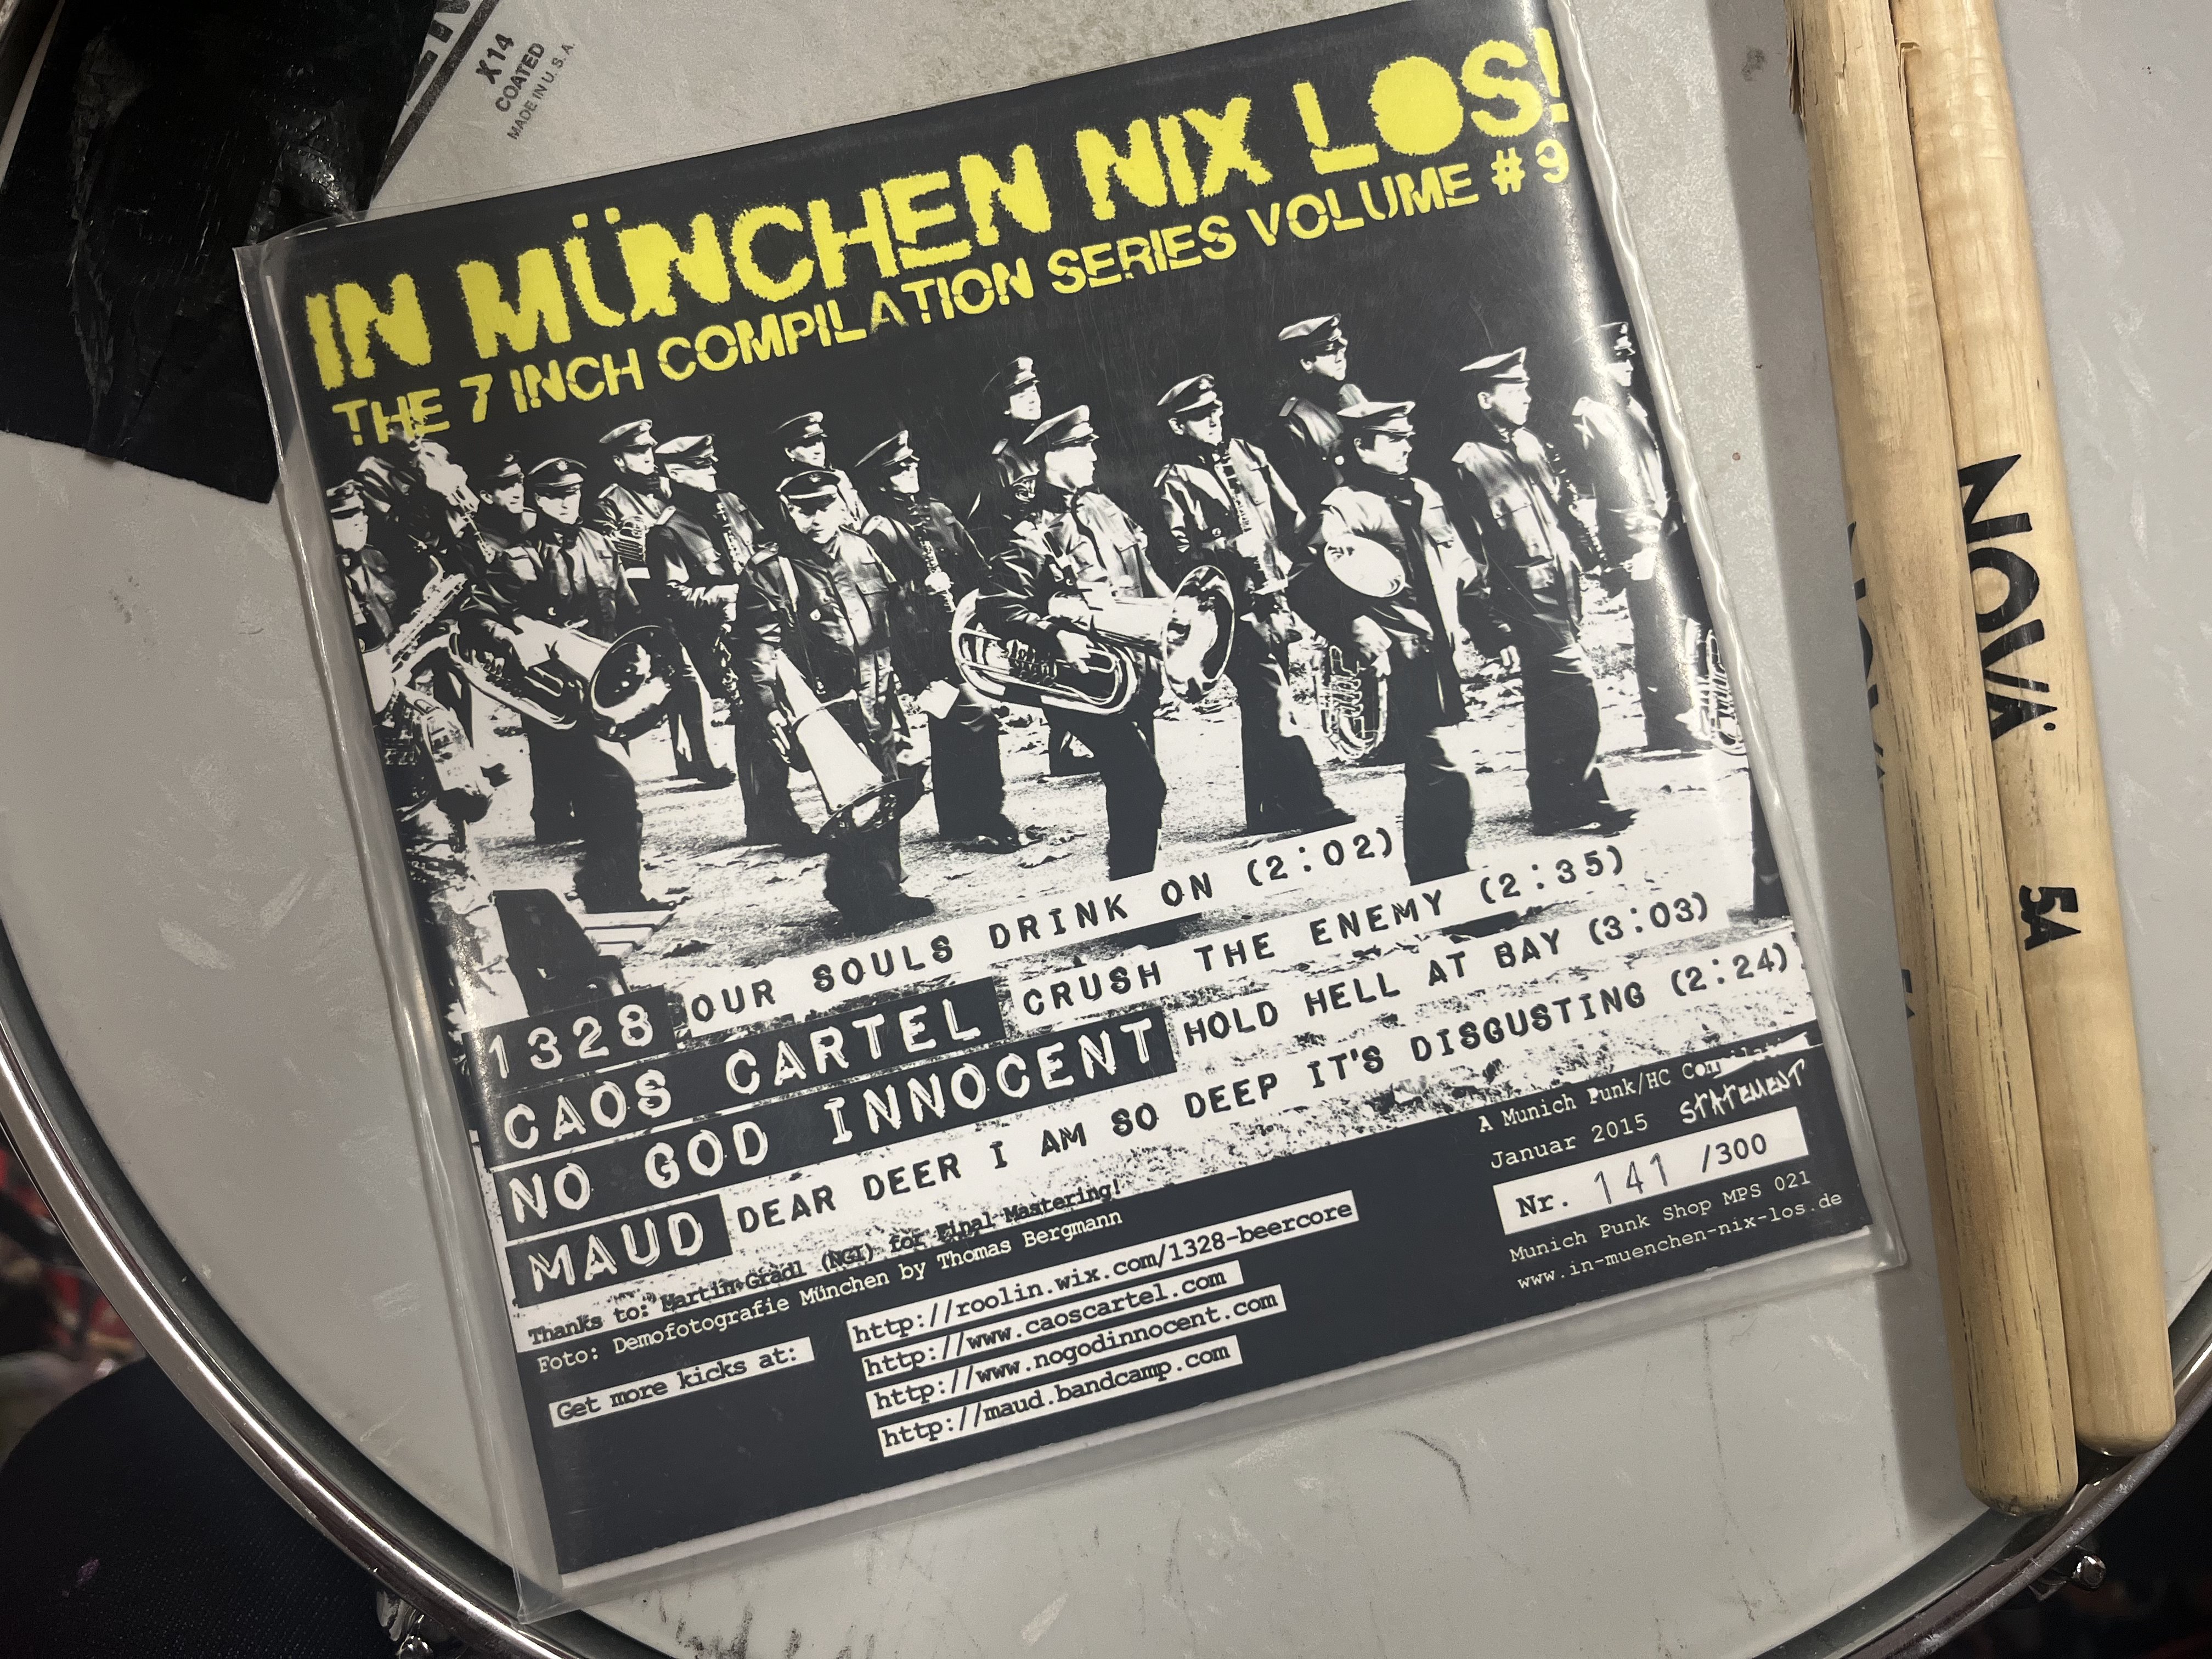  In München Nix Los! The 7 Inch Compilation Series Volume #9